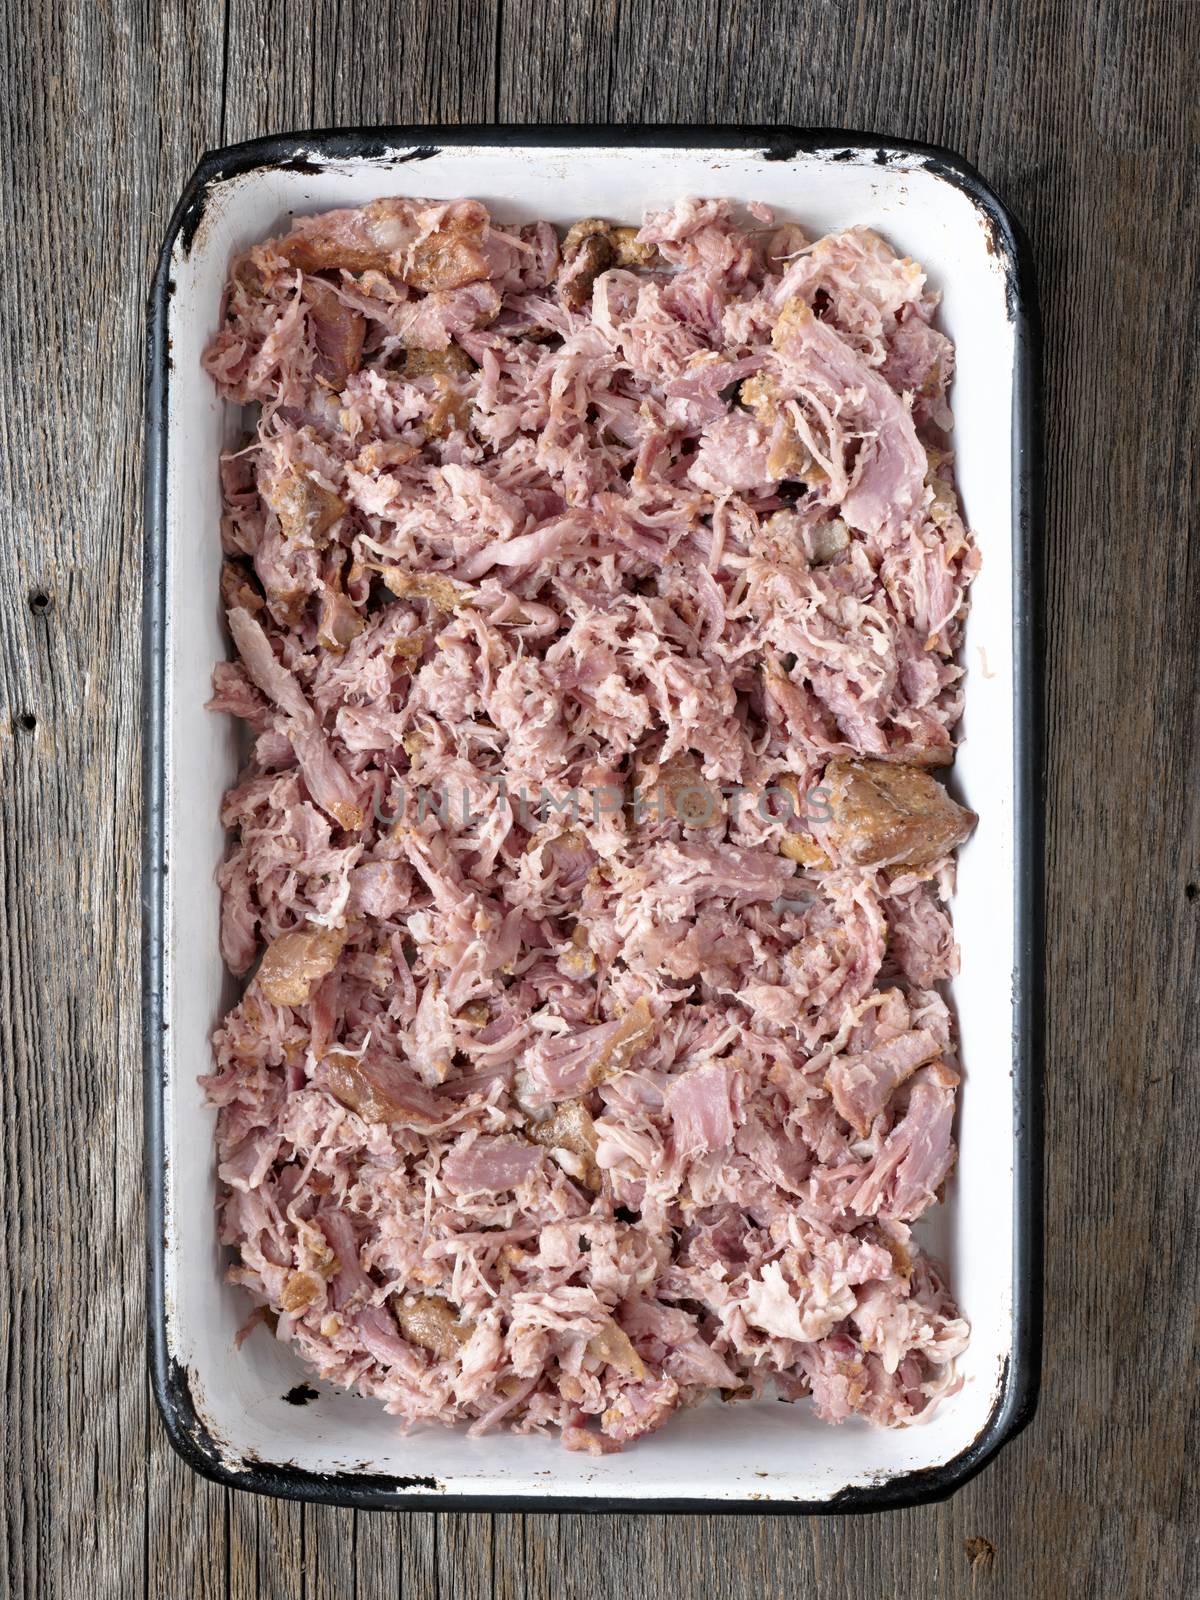 tray of rustic american  barbecued pulled pork by zkruger